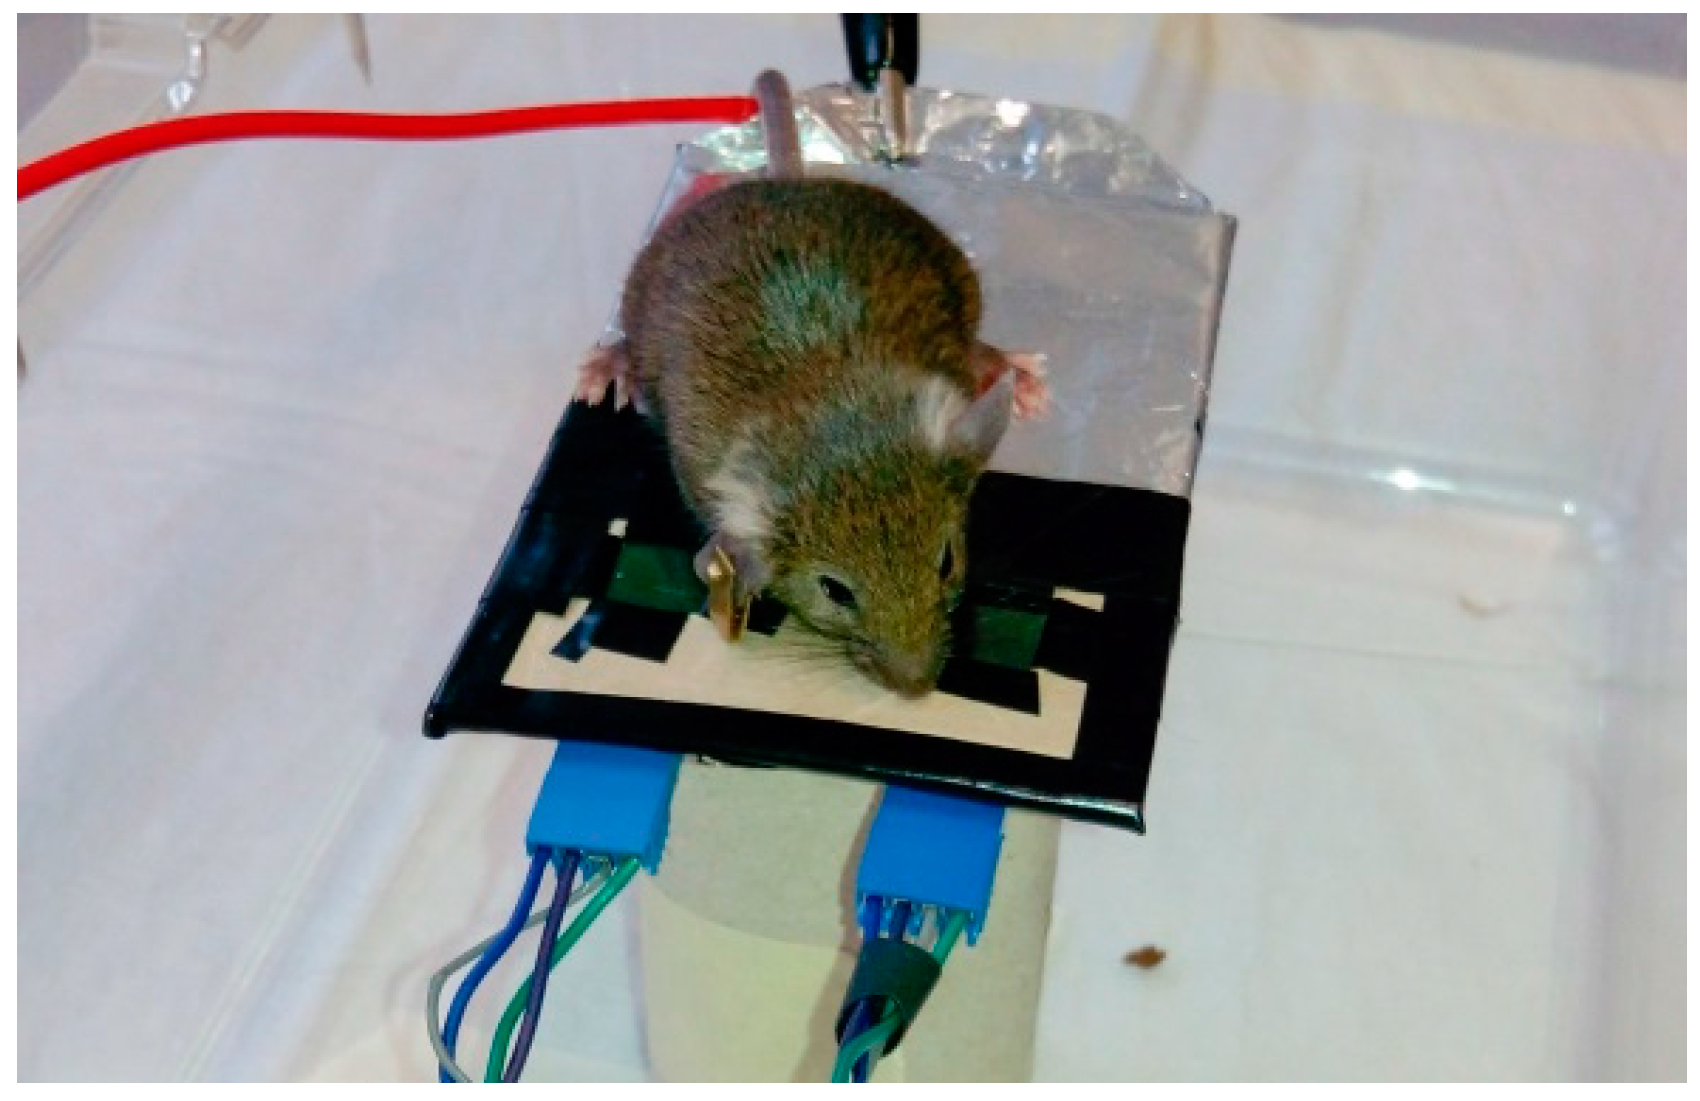 Sensors | Free Full-Text | Capacitive Sensing for Non-Invasive Breathing  and Heart Monitoring in Non-Restrained, Non-Sedated Laboratory Mice